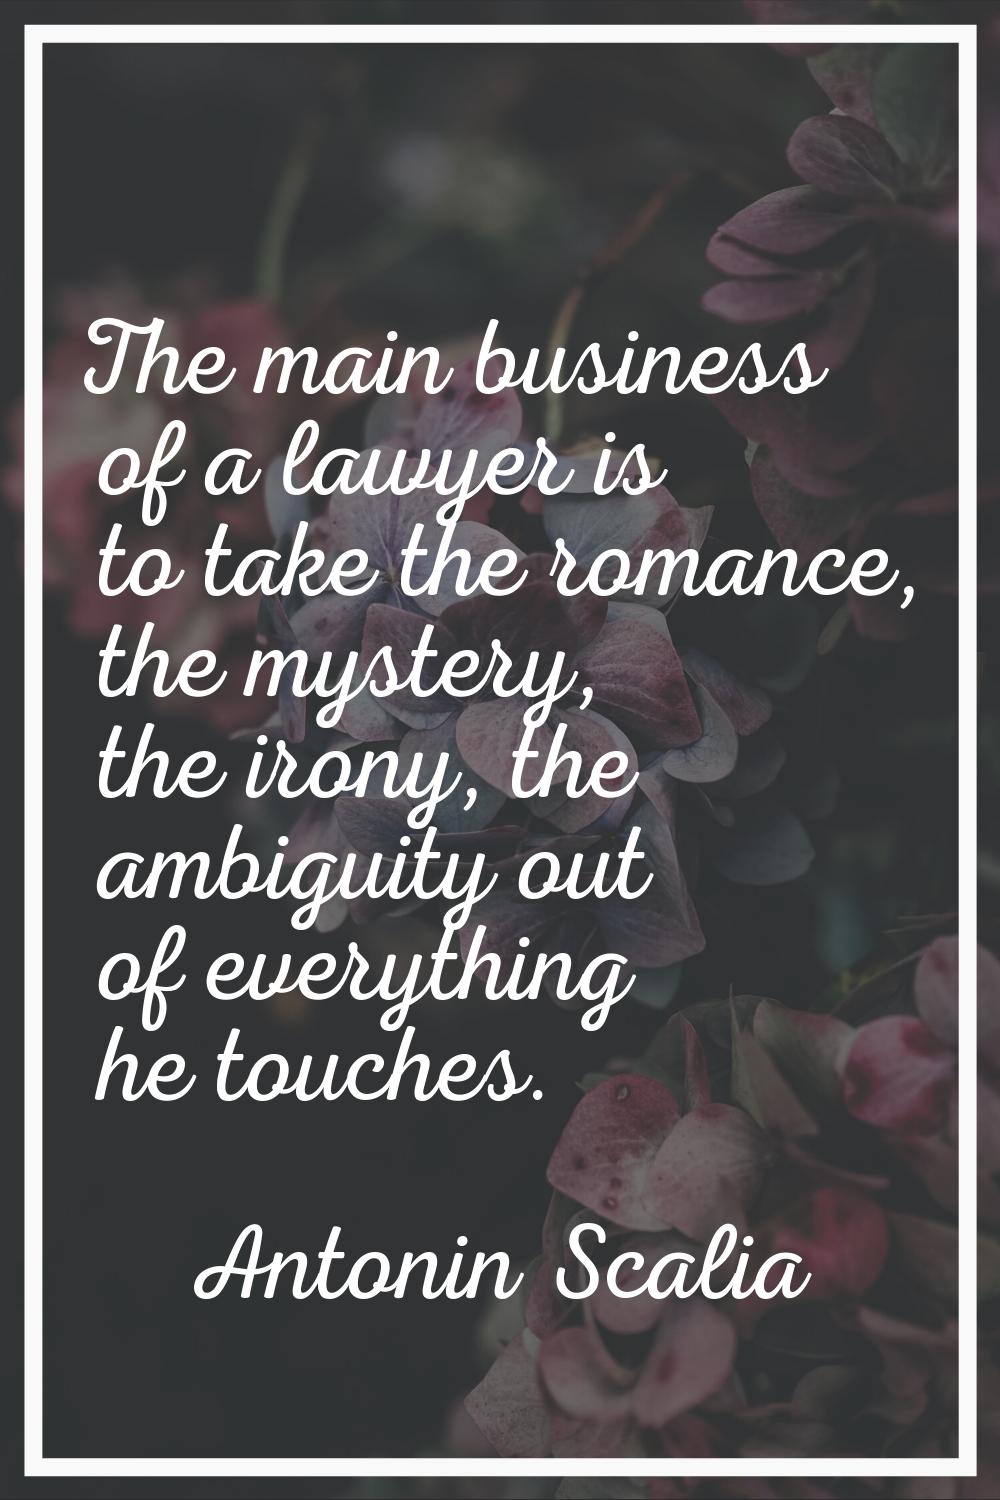 The main business of a lawyer is to take the romance, the mystery, the irony, the ambiguity out of 